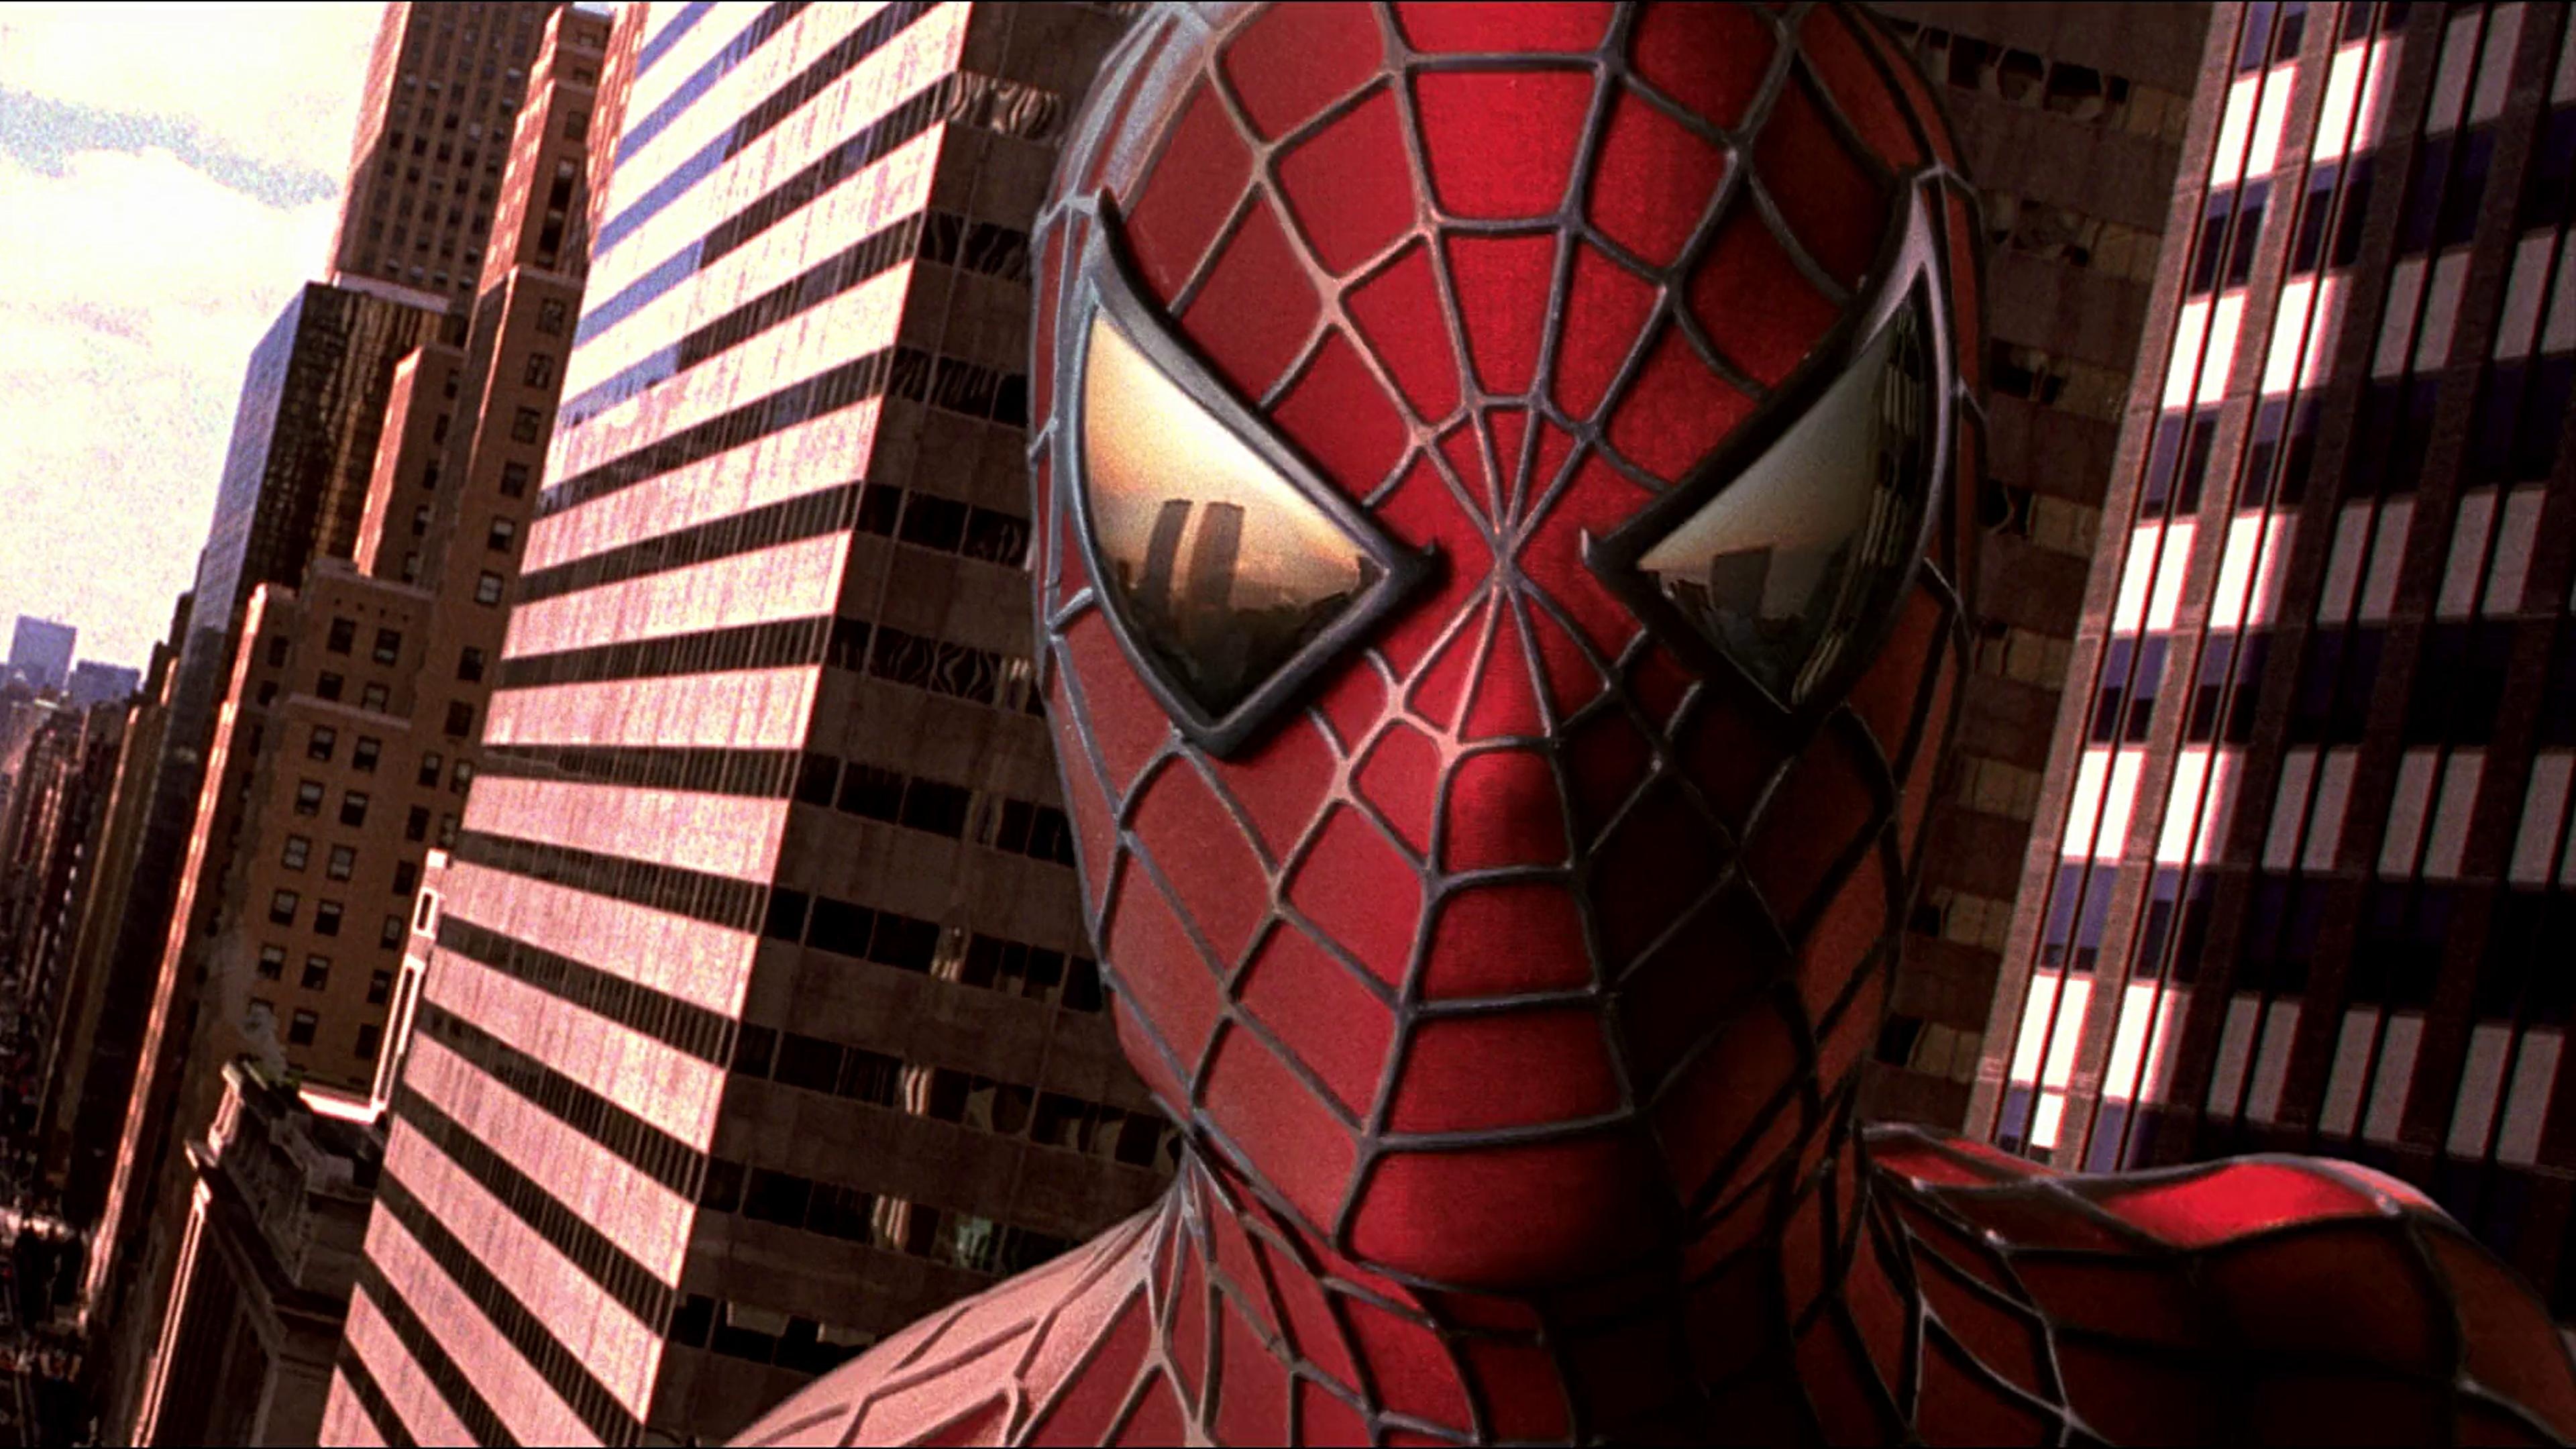 Tobey Maguire trilogy, Nostalgic wallpapers, Iconic Spider-Man movies, 3840x2160 4K Desktop